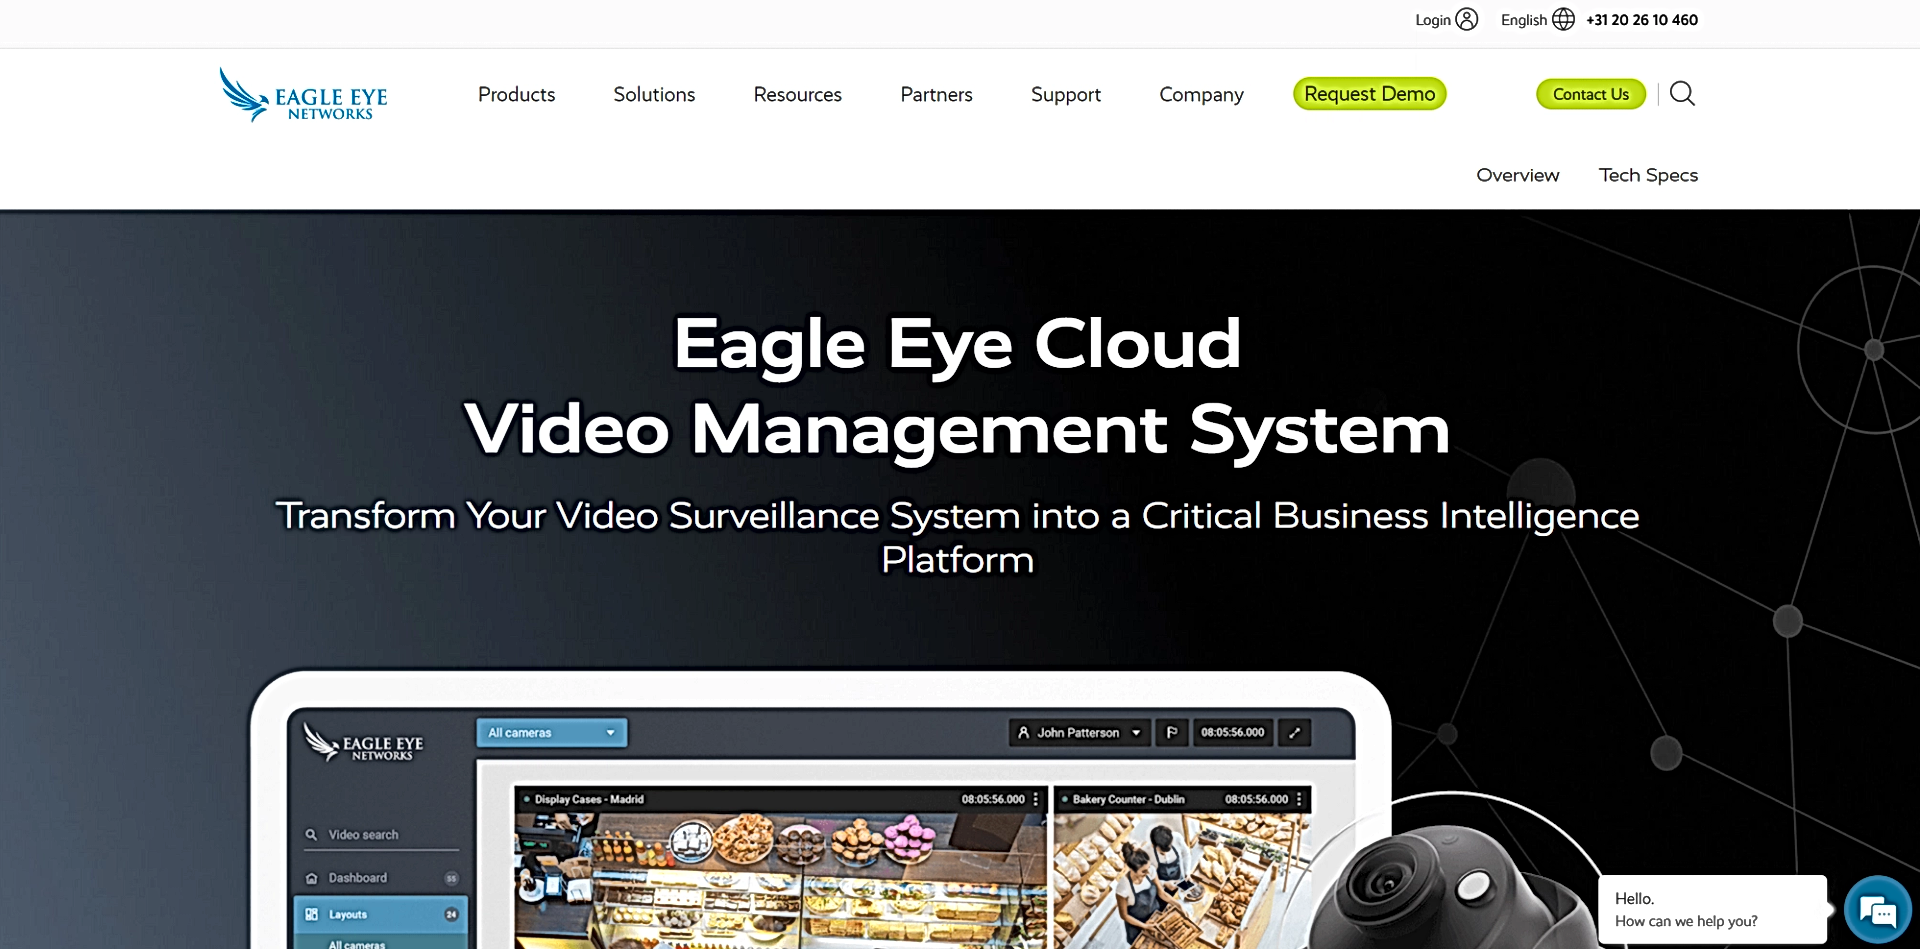 Eagle Eye Networks featured